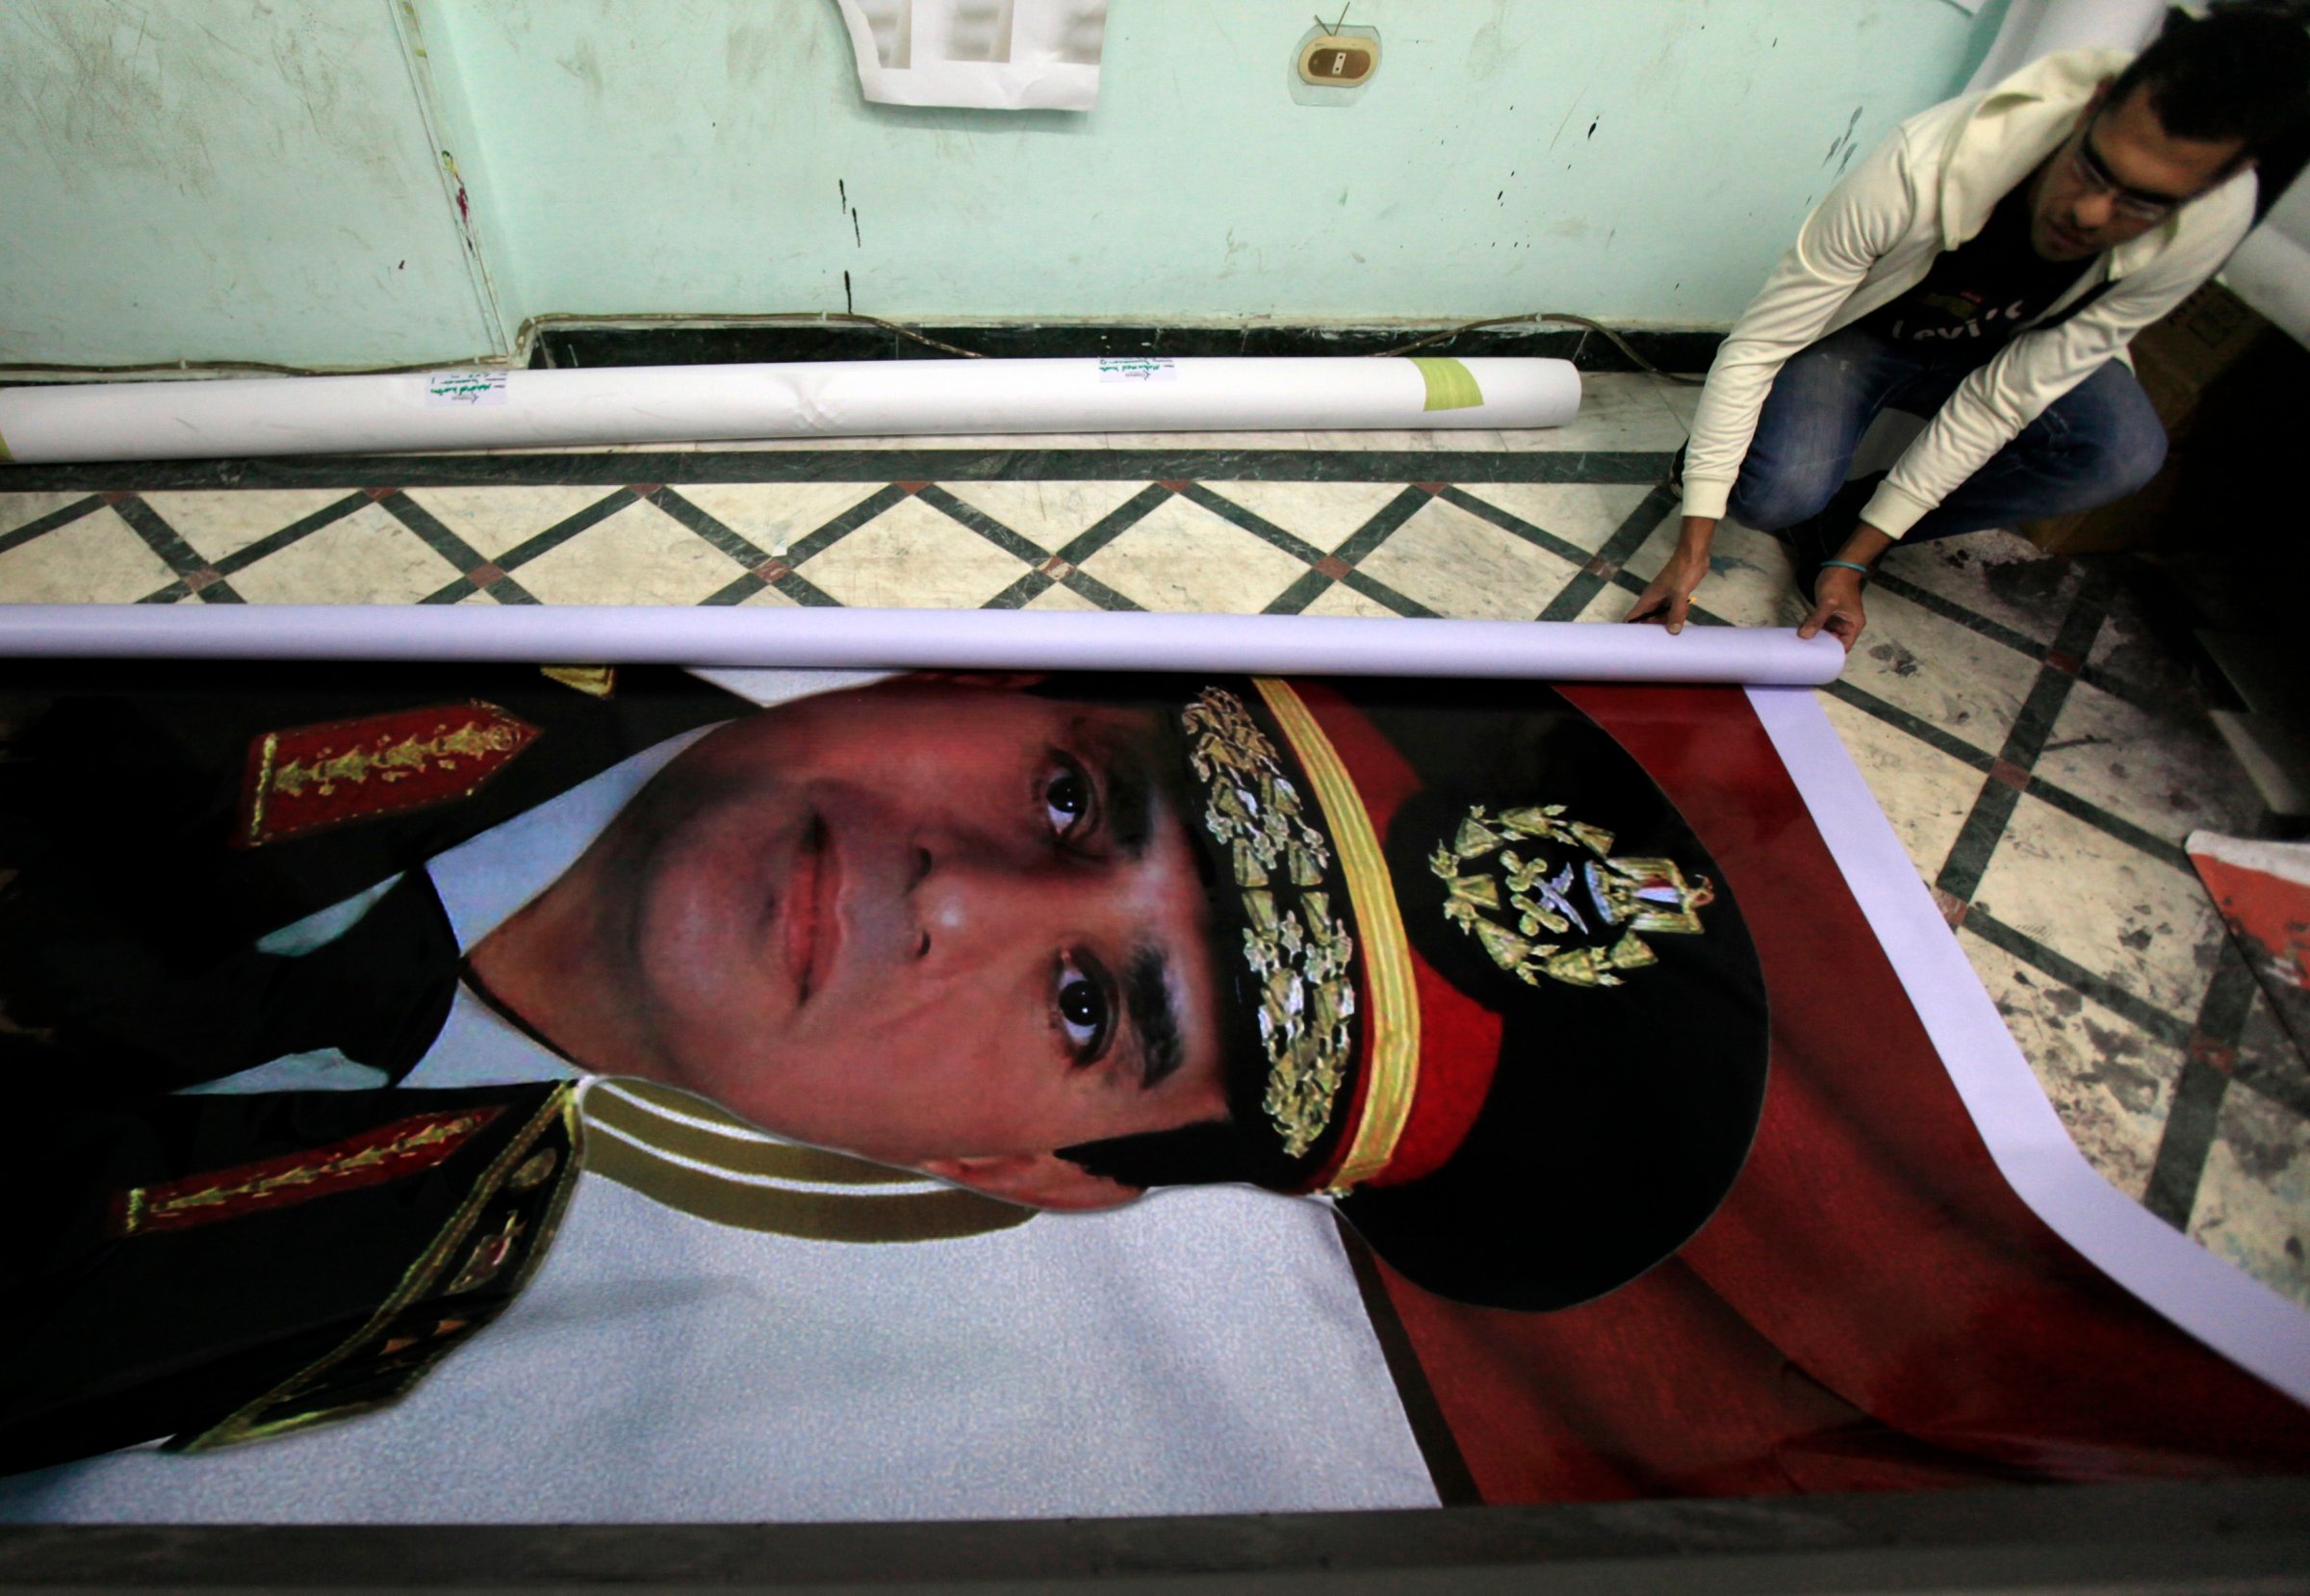 Eyes on the prize A printshop worker rolls up a poster of al-Sisi, who resigned as Egypts military chief in March in order to run for President